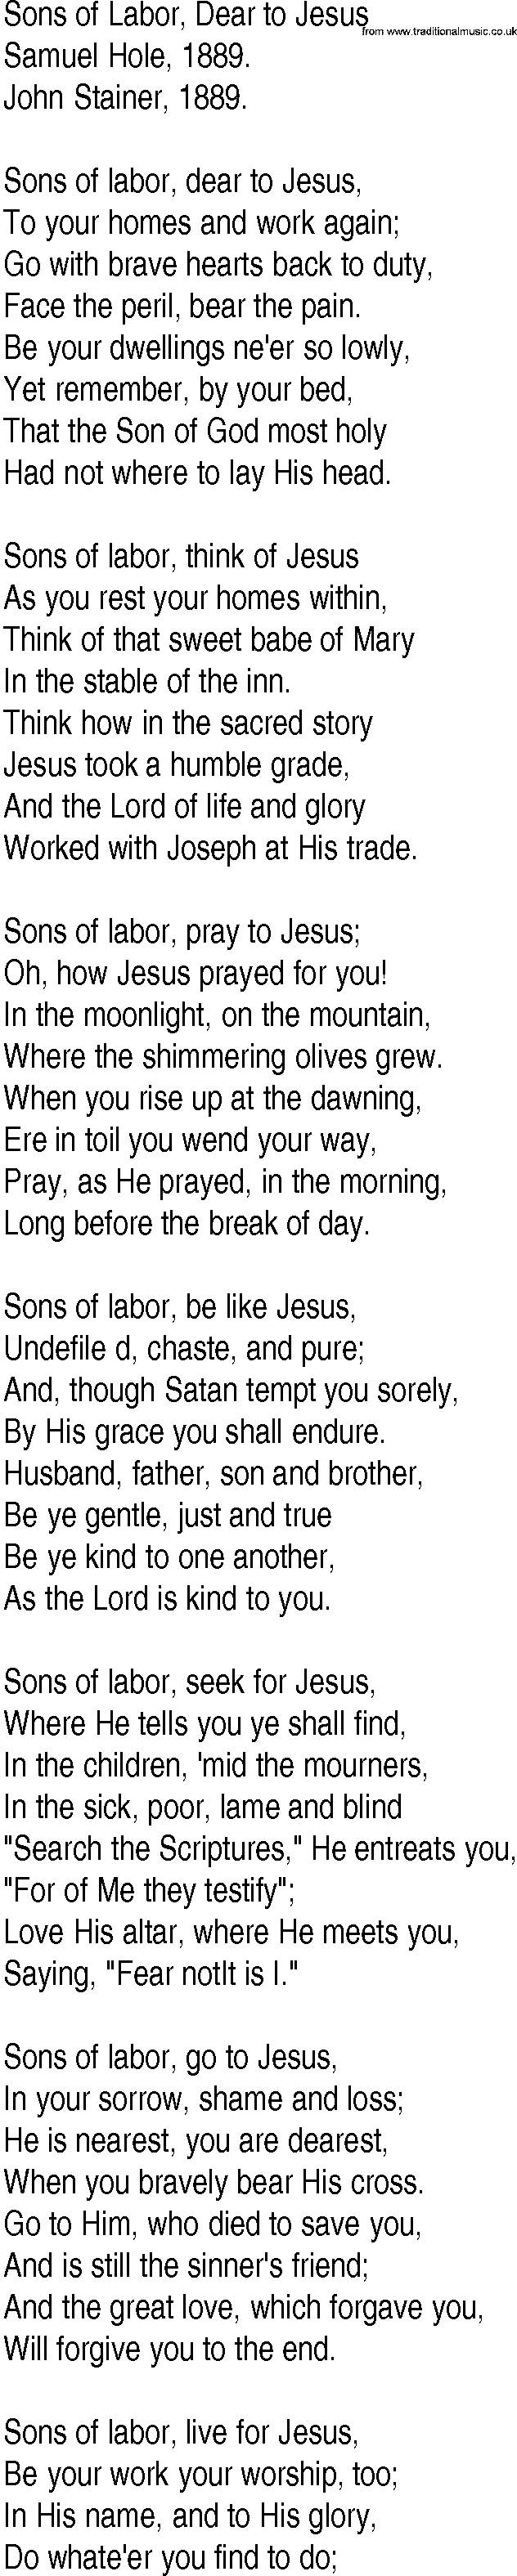 Hymn and Gospel Song: Sons of Labor, Dear to Jesus by Samuel Hole lyrics